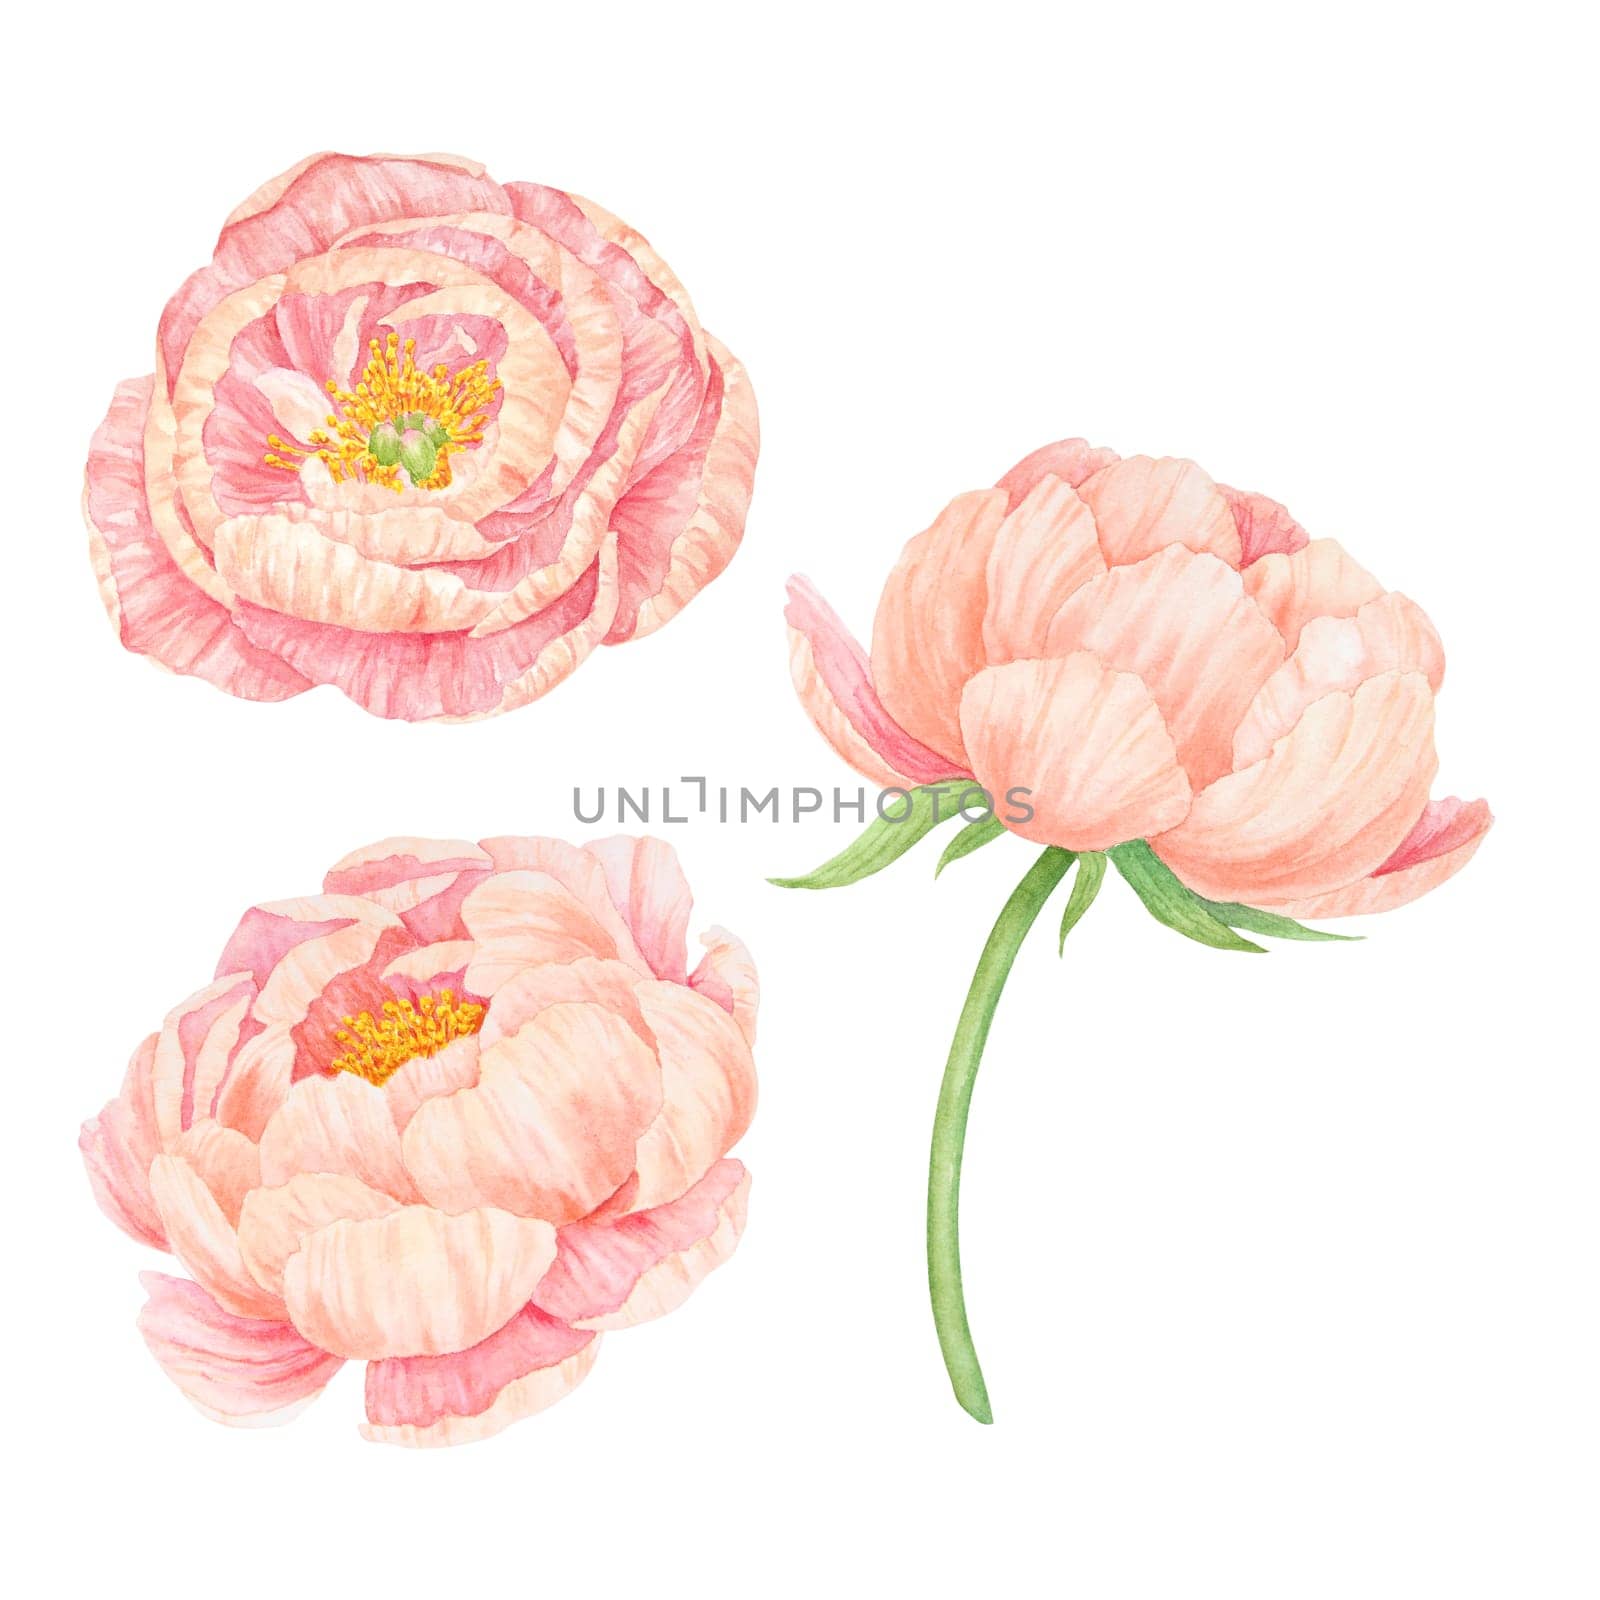 Set of peach peony watercolor hand drawn paintings. Realistic flower clipart, floral arrangement. Chinese national symbol illustration. Perfect for card design, wedding invitation, prints, textile, packing.